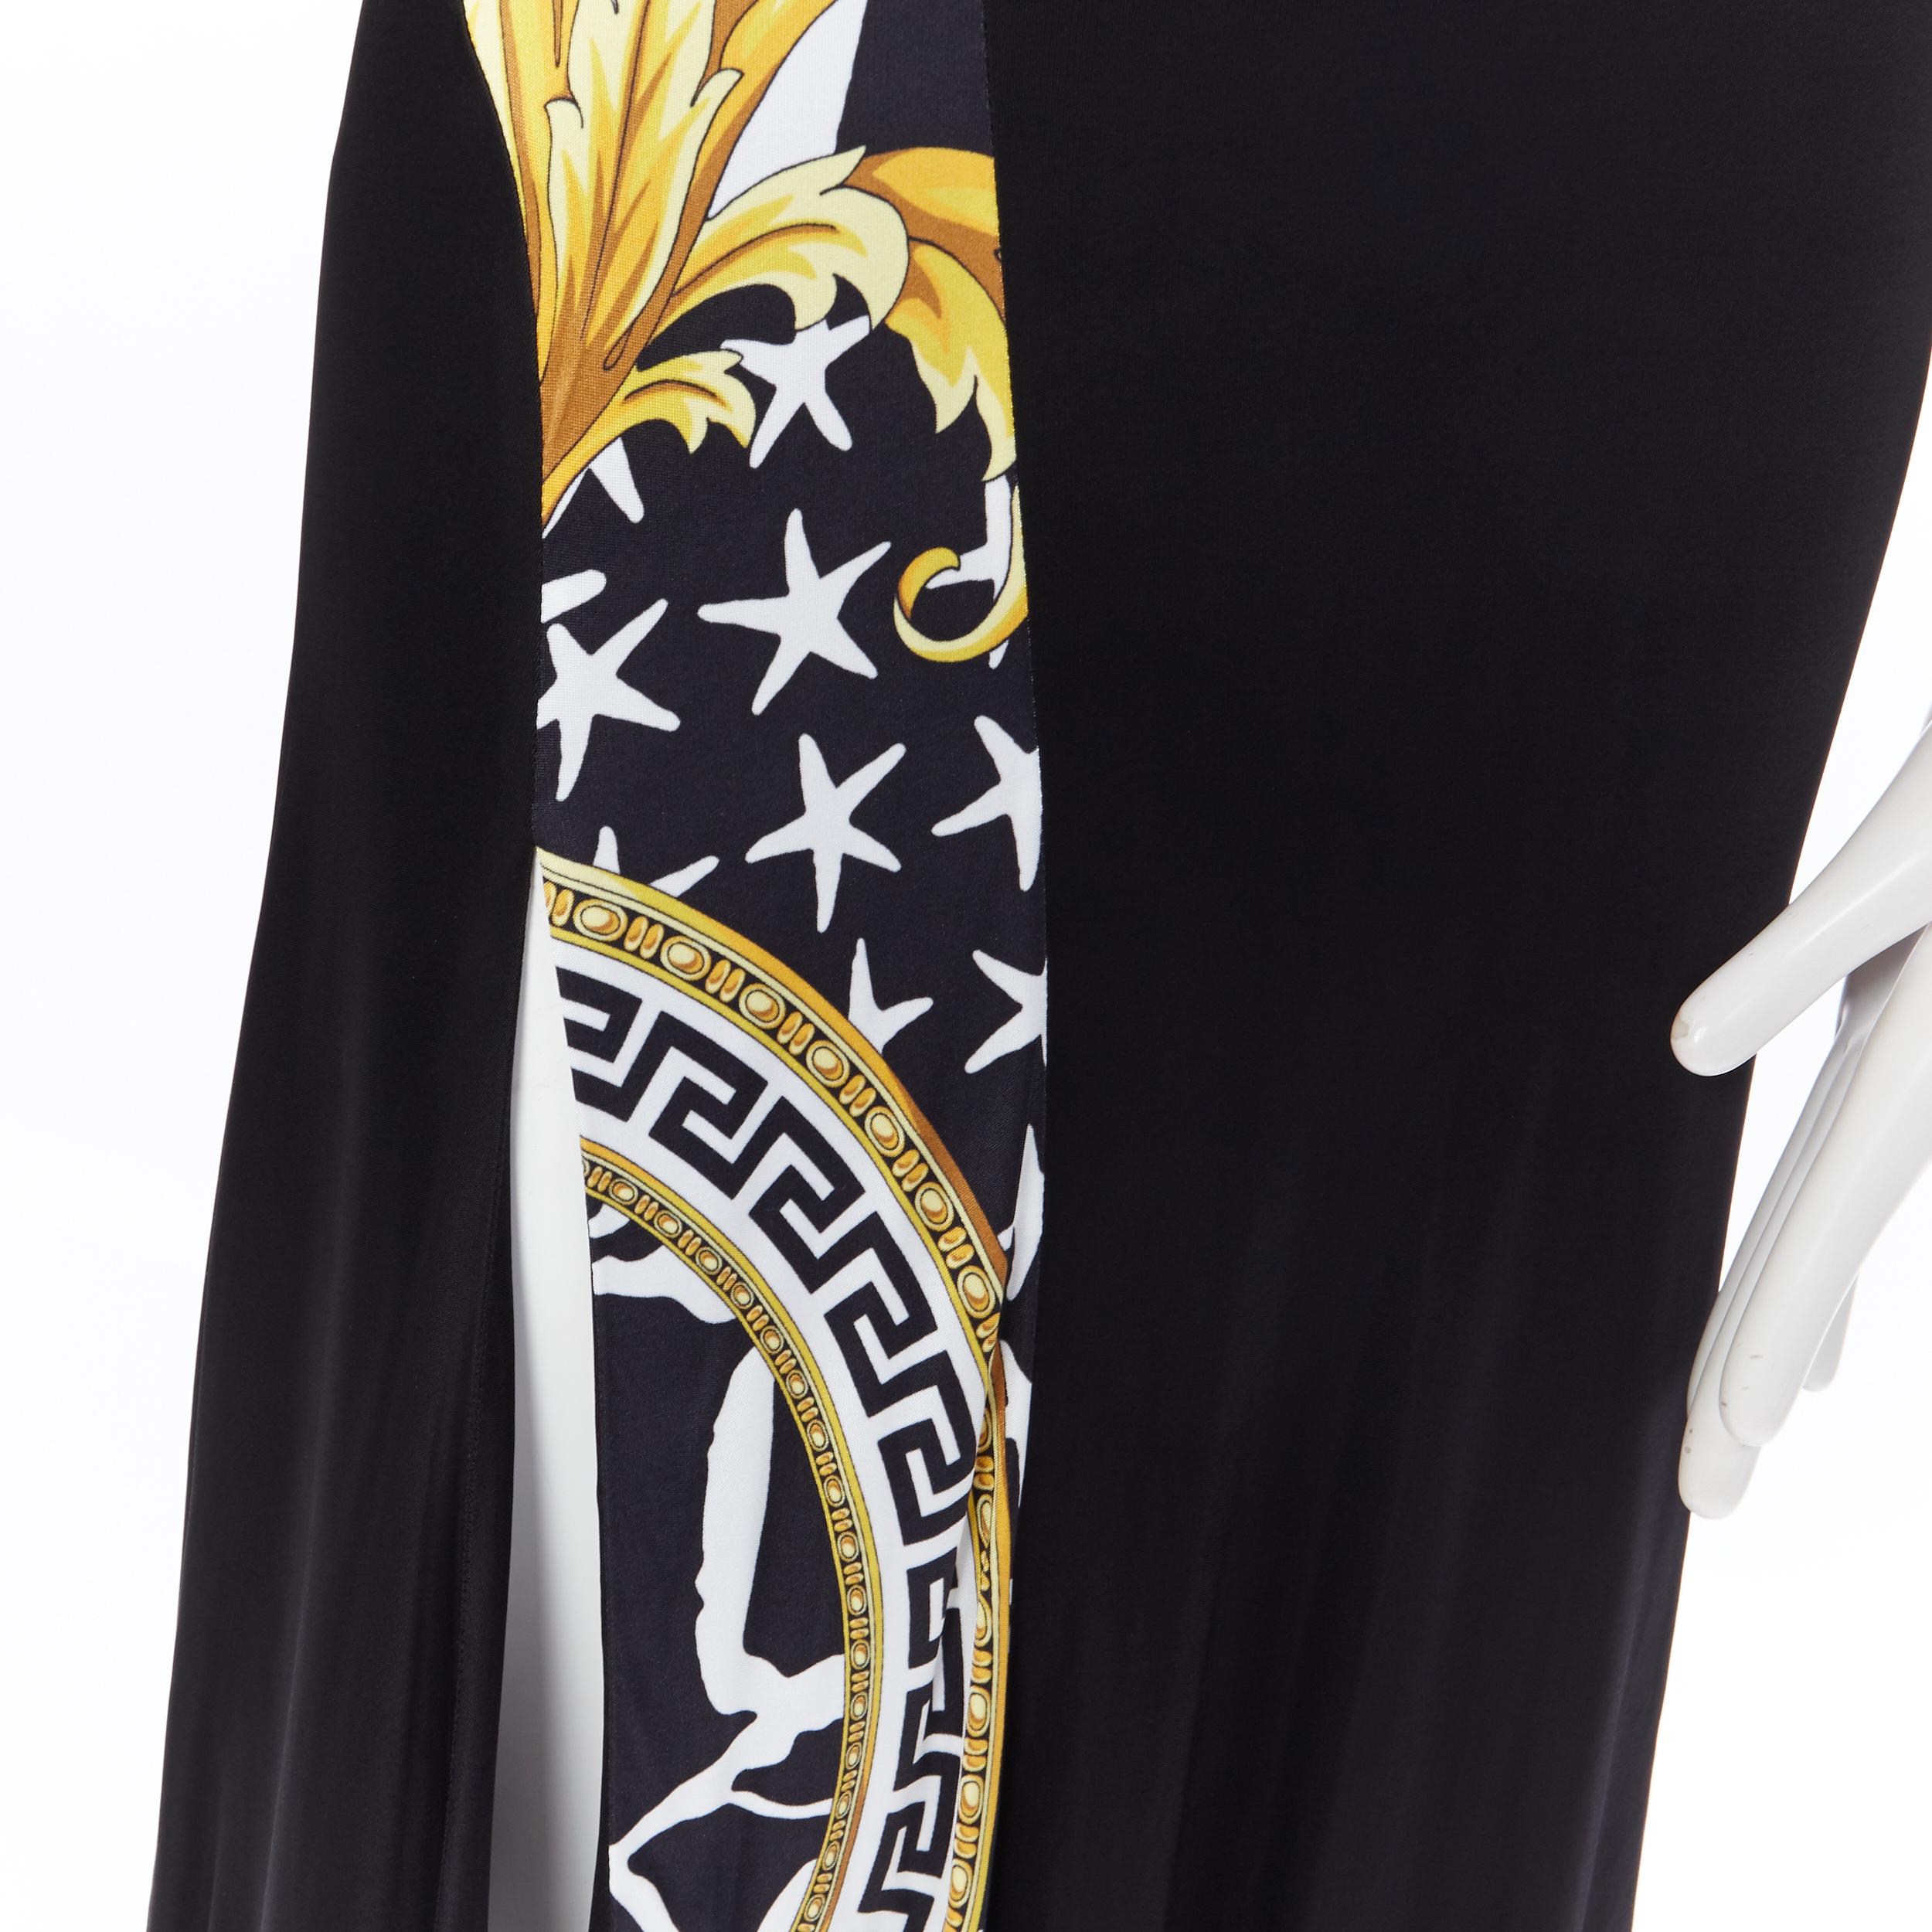 VERSACE AW19 black viscose gold baroque greca paneled draped hem dress IT40 S
Brand: Versace
Designer: Donatella Versace
Collection: Fall Winter 2019
Model Name / Style: Cocktail dress
Material: Viscose
Color: Black
Pattern: Floral; baroque and